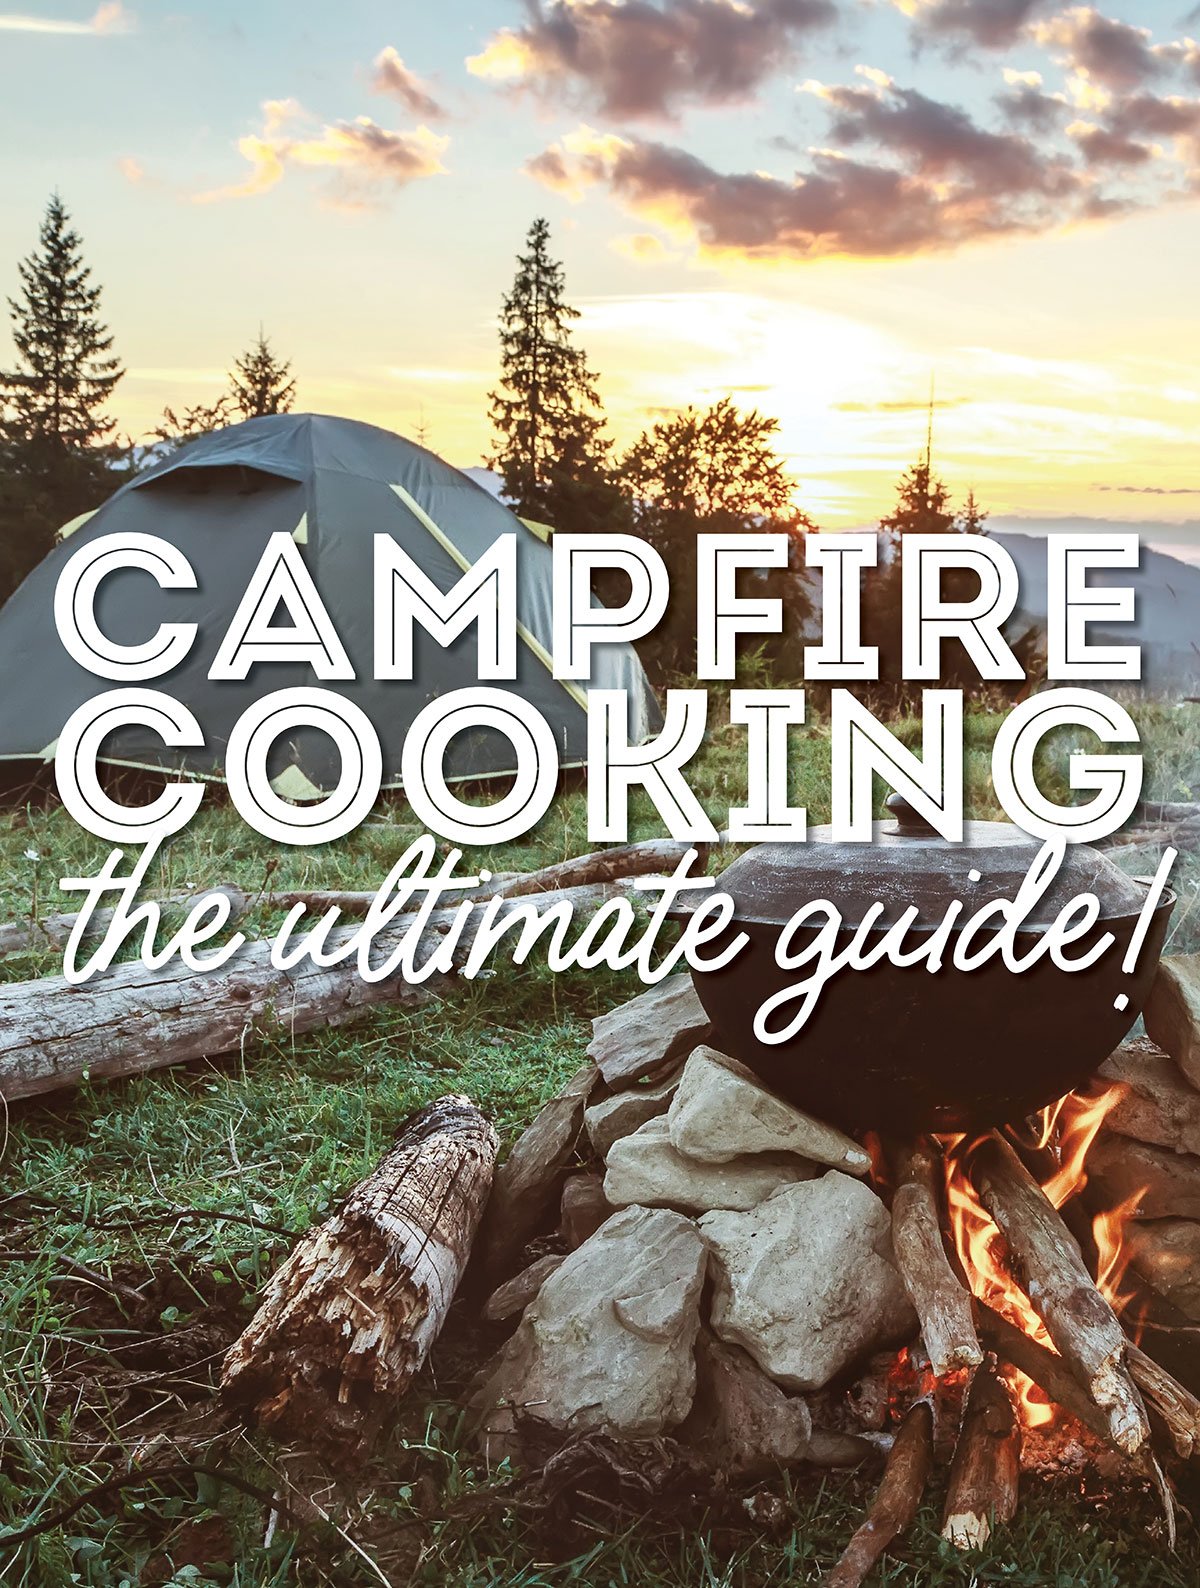 Collage that says "campfire cooking".